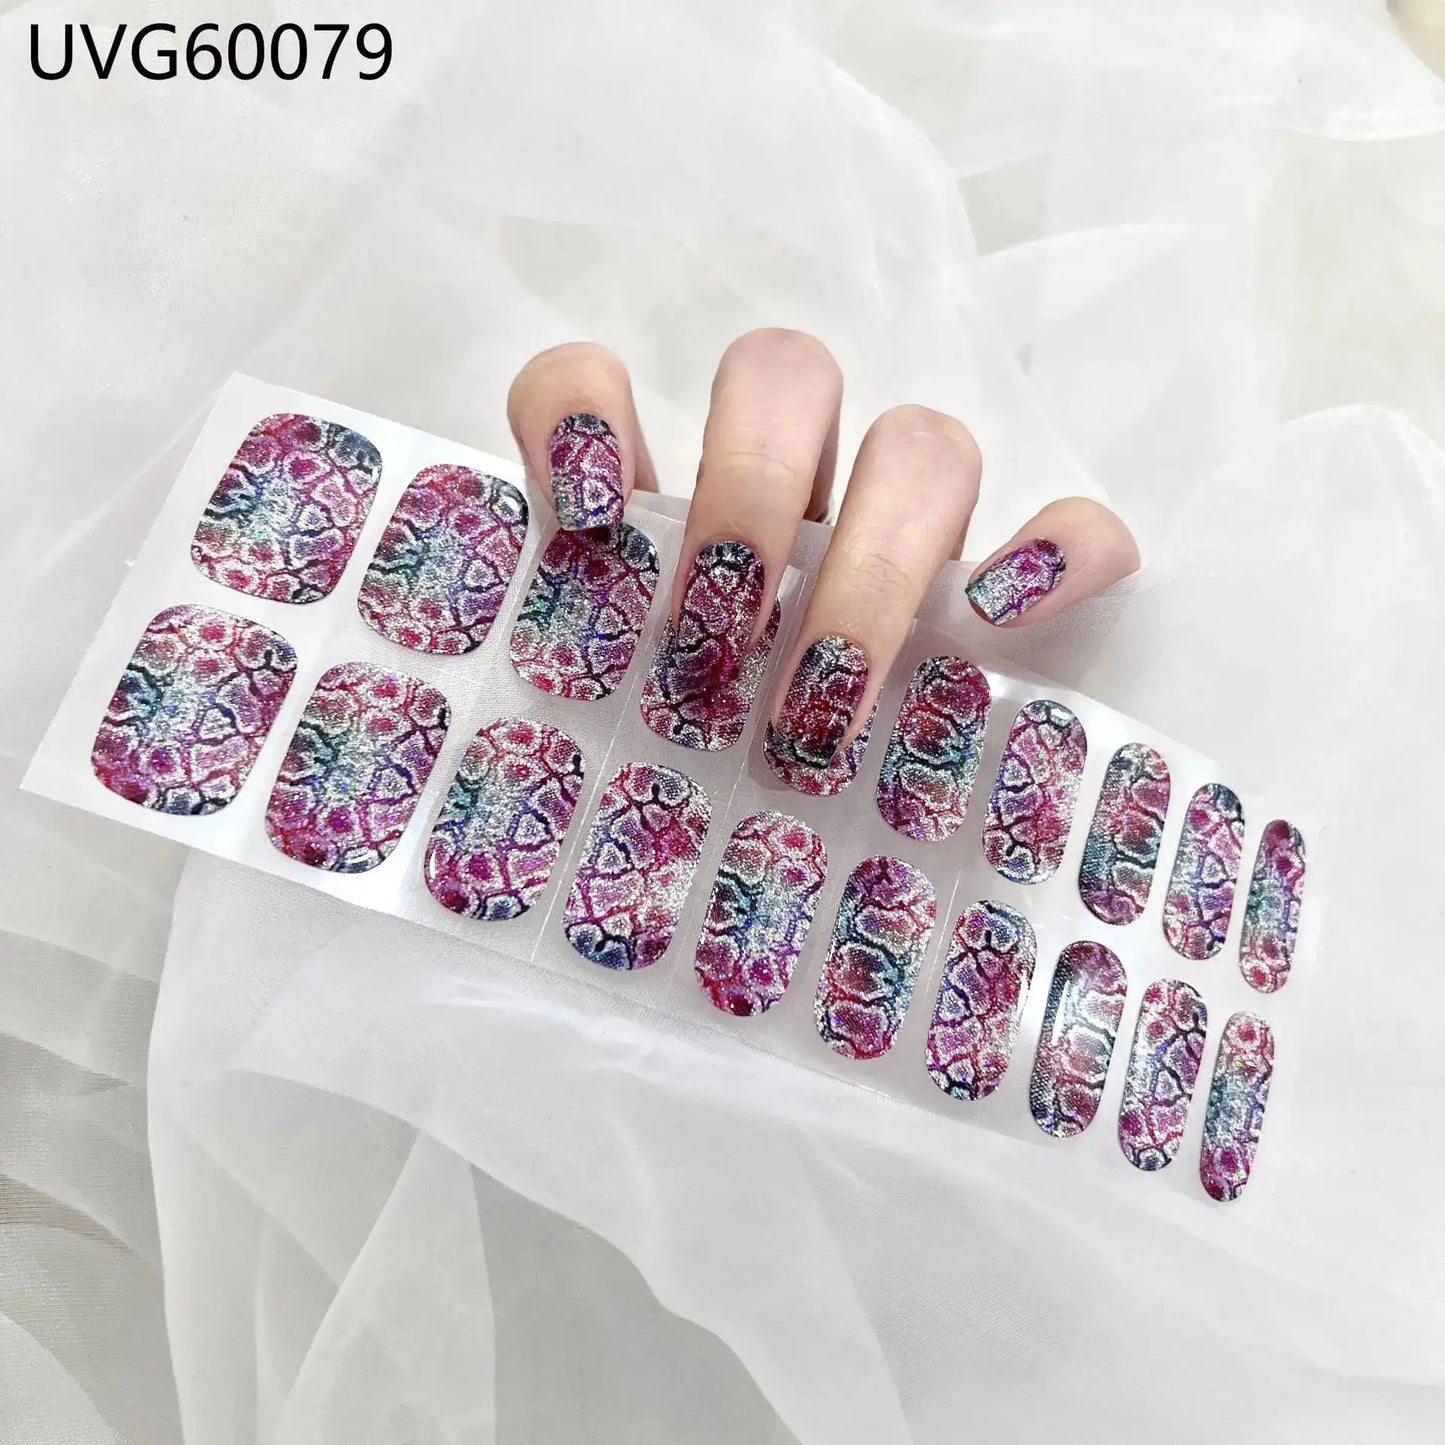 22 Tips Semi-Cured Gel Nail Stickers - Salon-Worthy Nails at Home